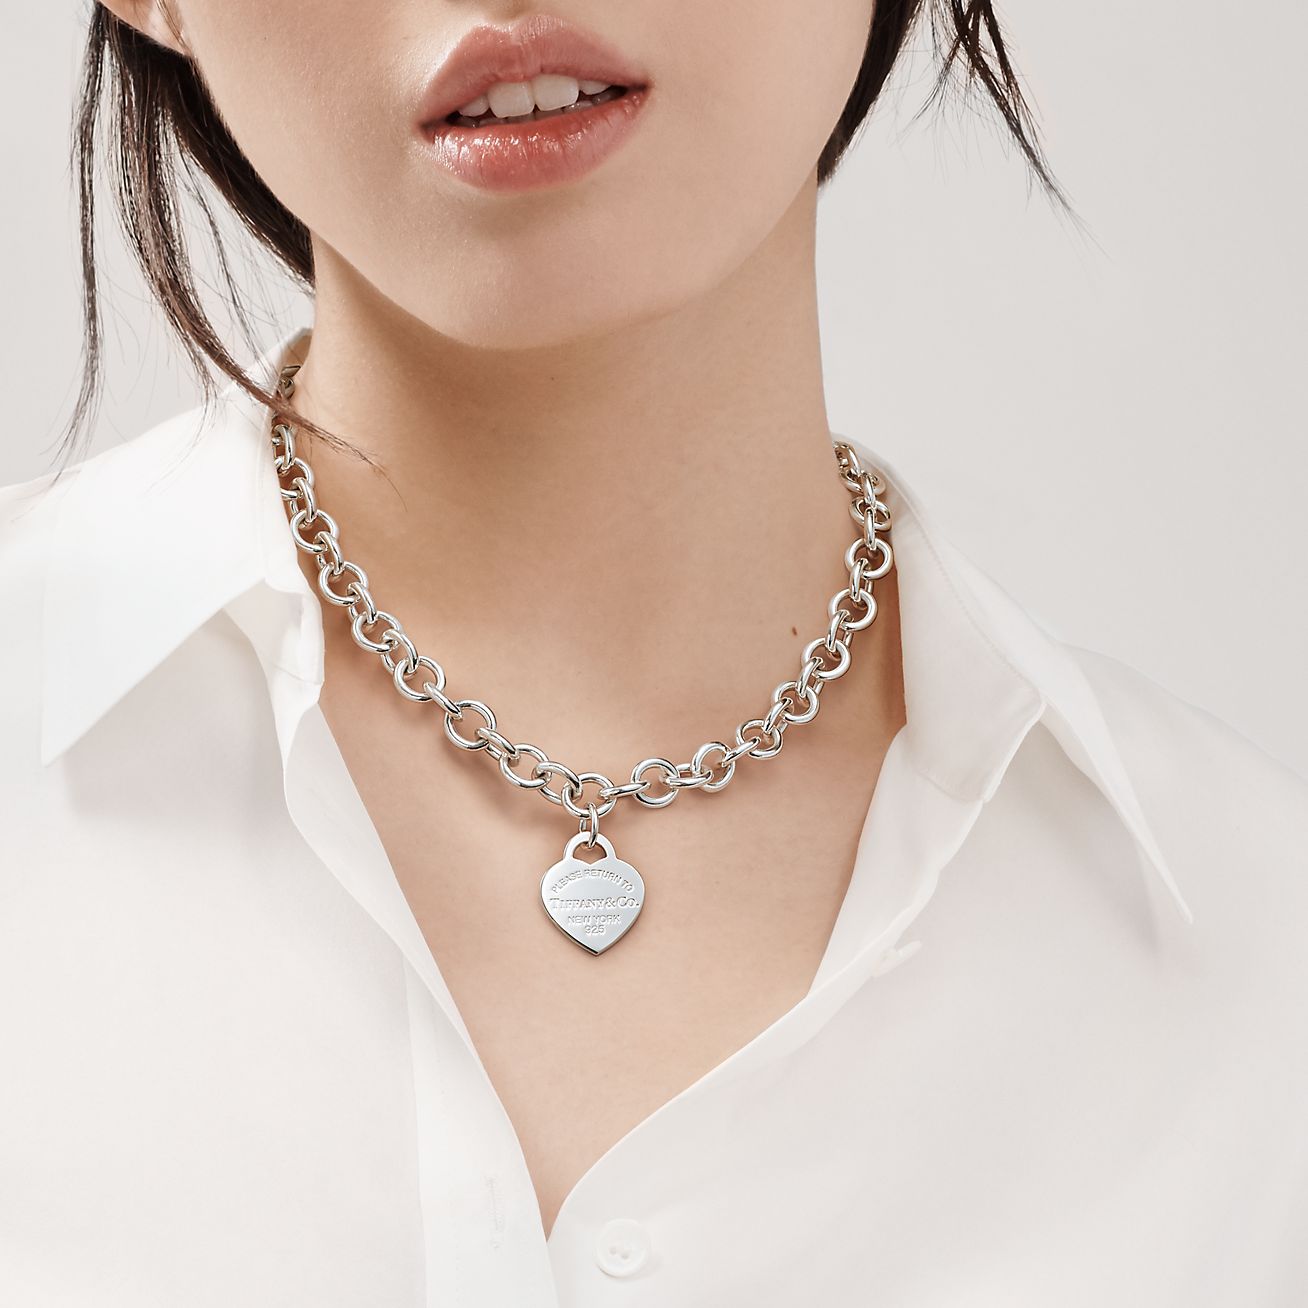 Return to Tiffany® Heart Tag Chain Link Necklace in Silver